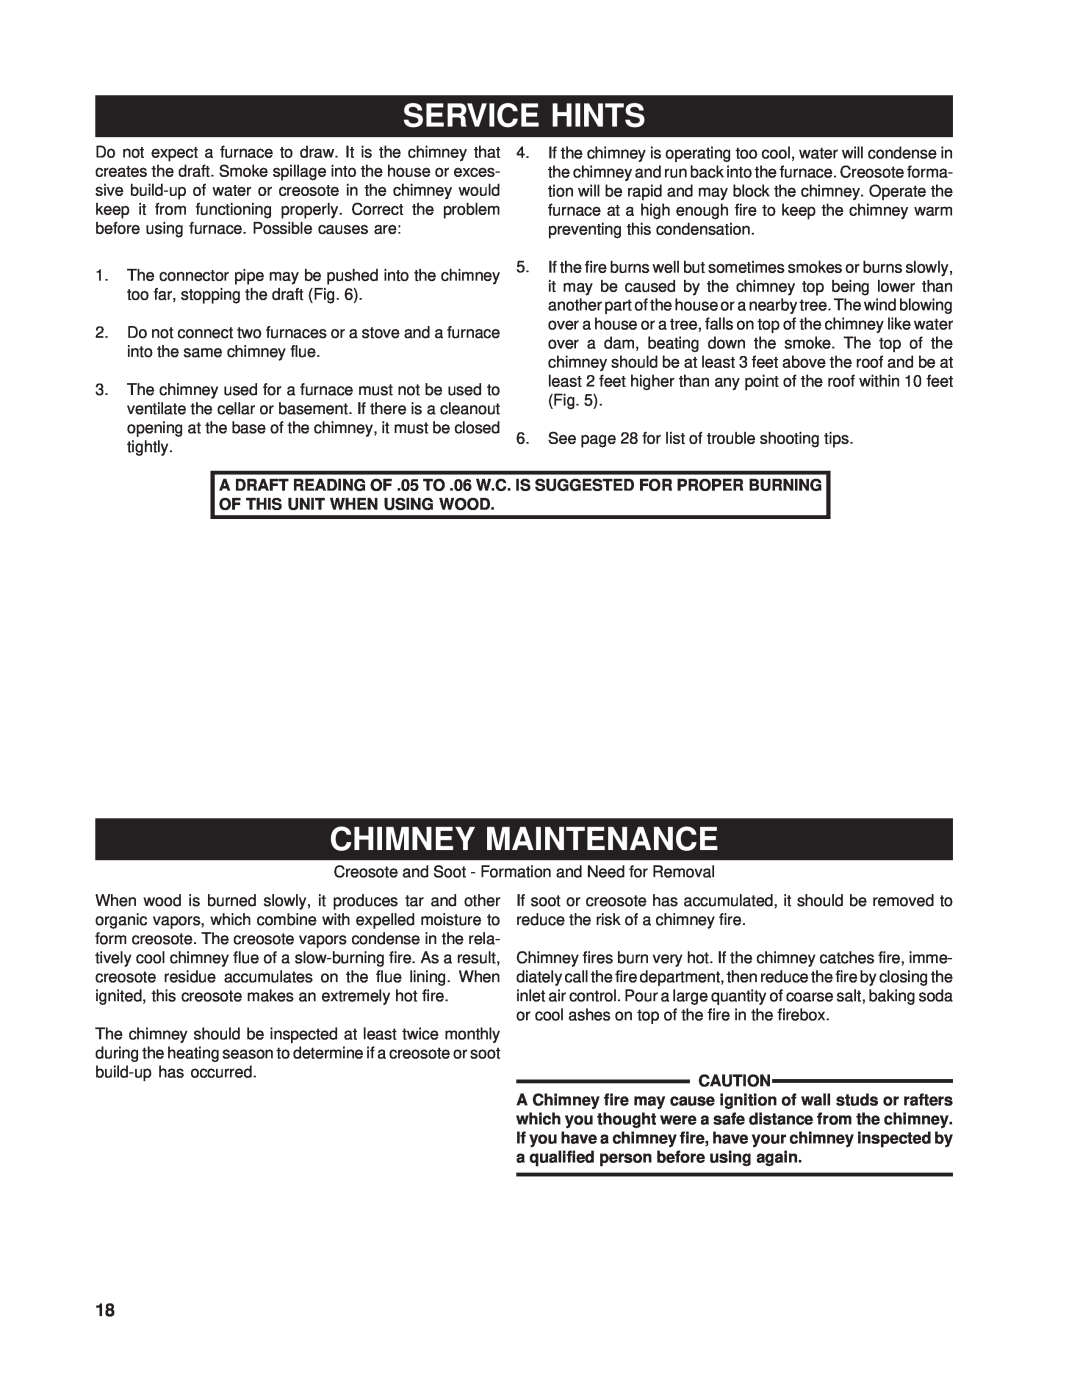 United States Stove 1200G owner manual Service Hints, Chimney Maintenance 